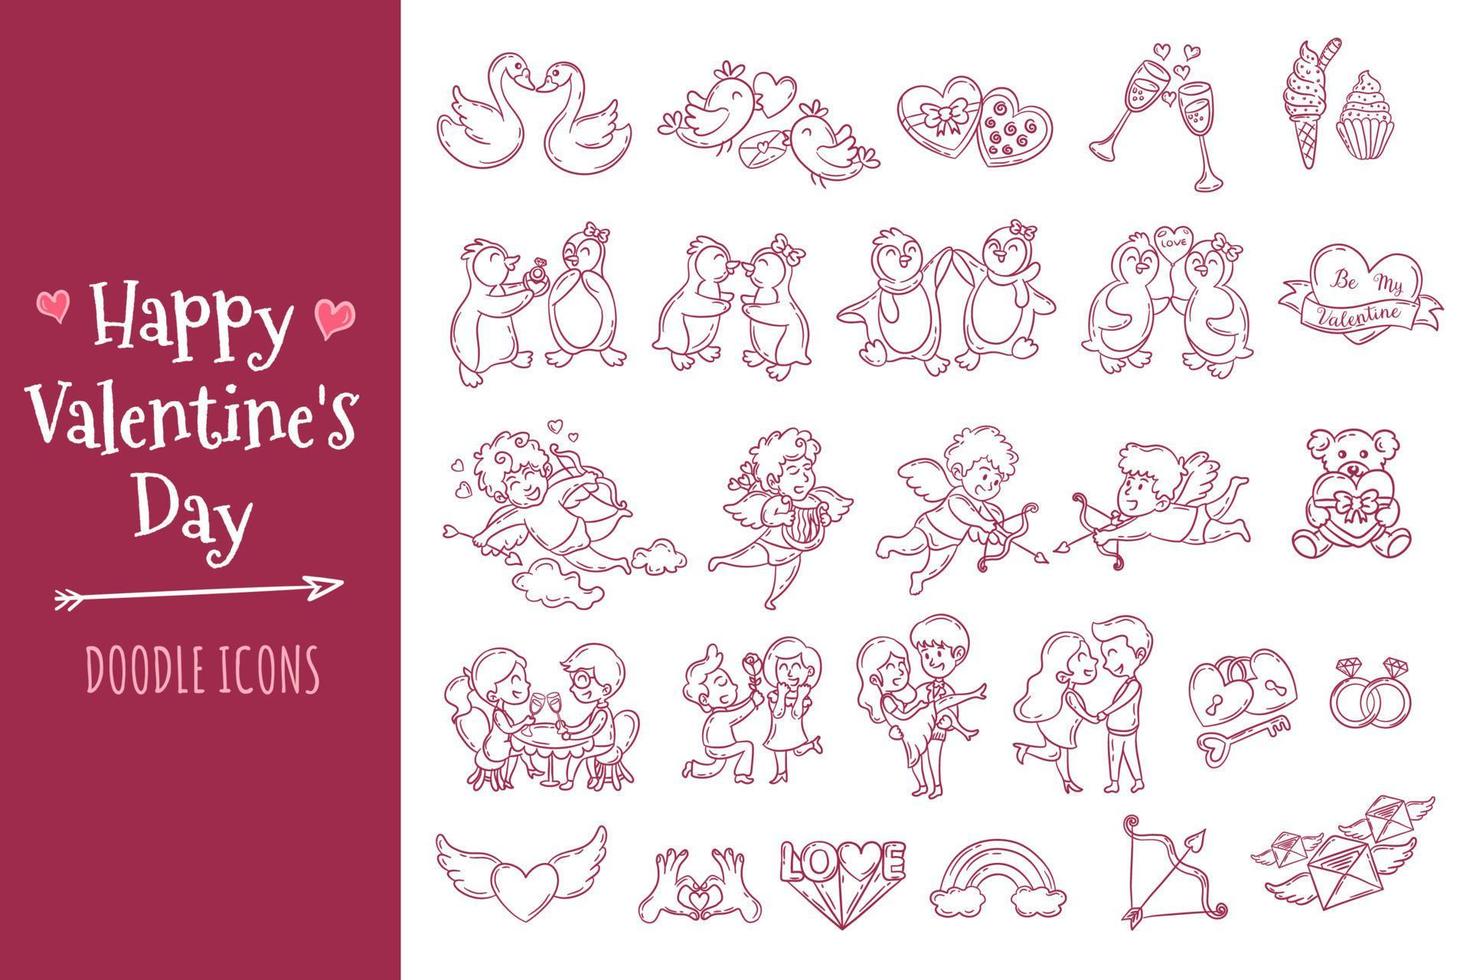 Valentine's Day doodle icons set. Collection of Valentine's Day elements vector